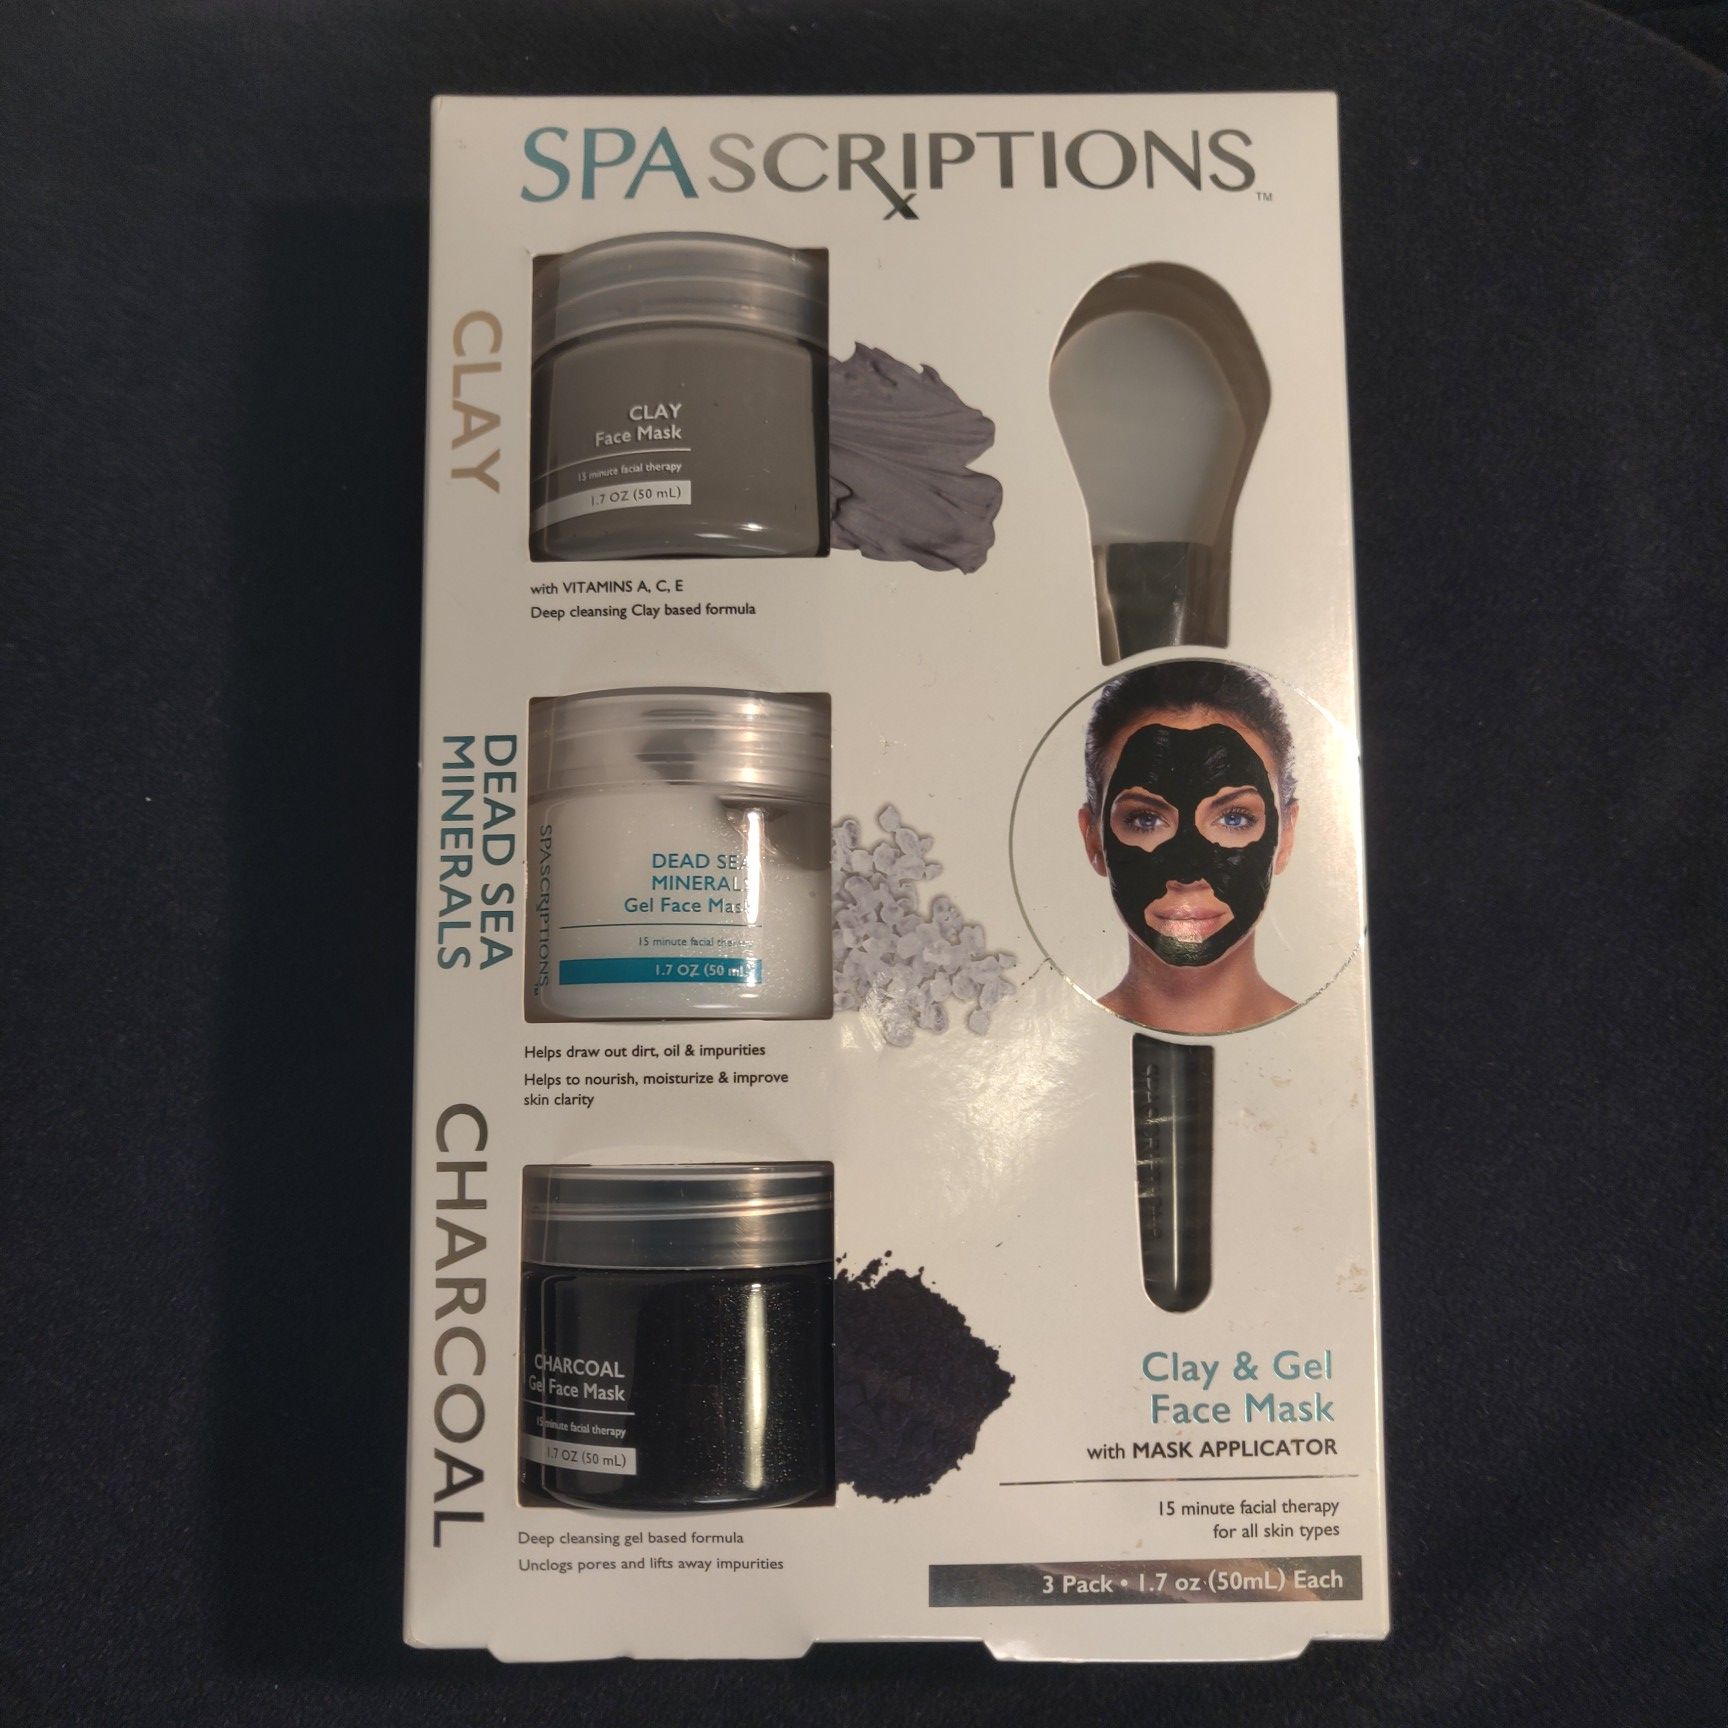 NIB Spascriptions clay and gel face mask